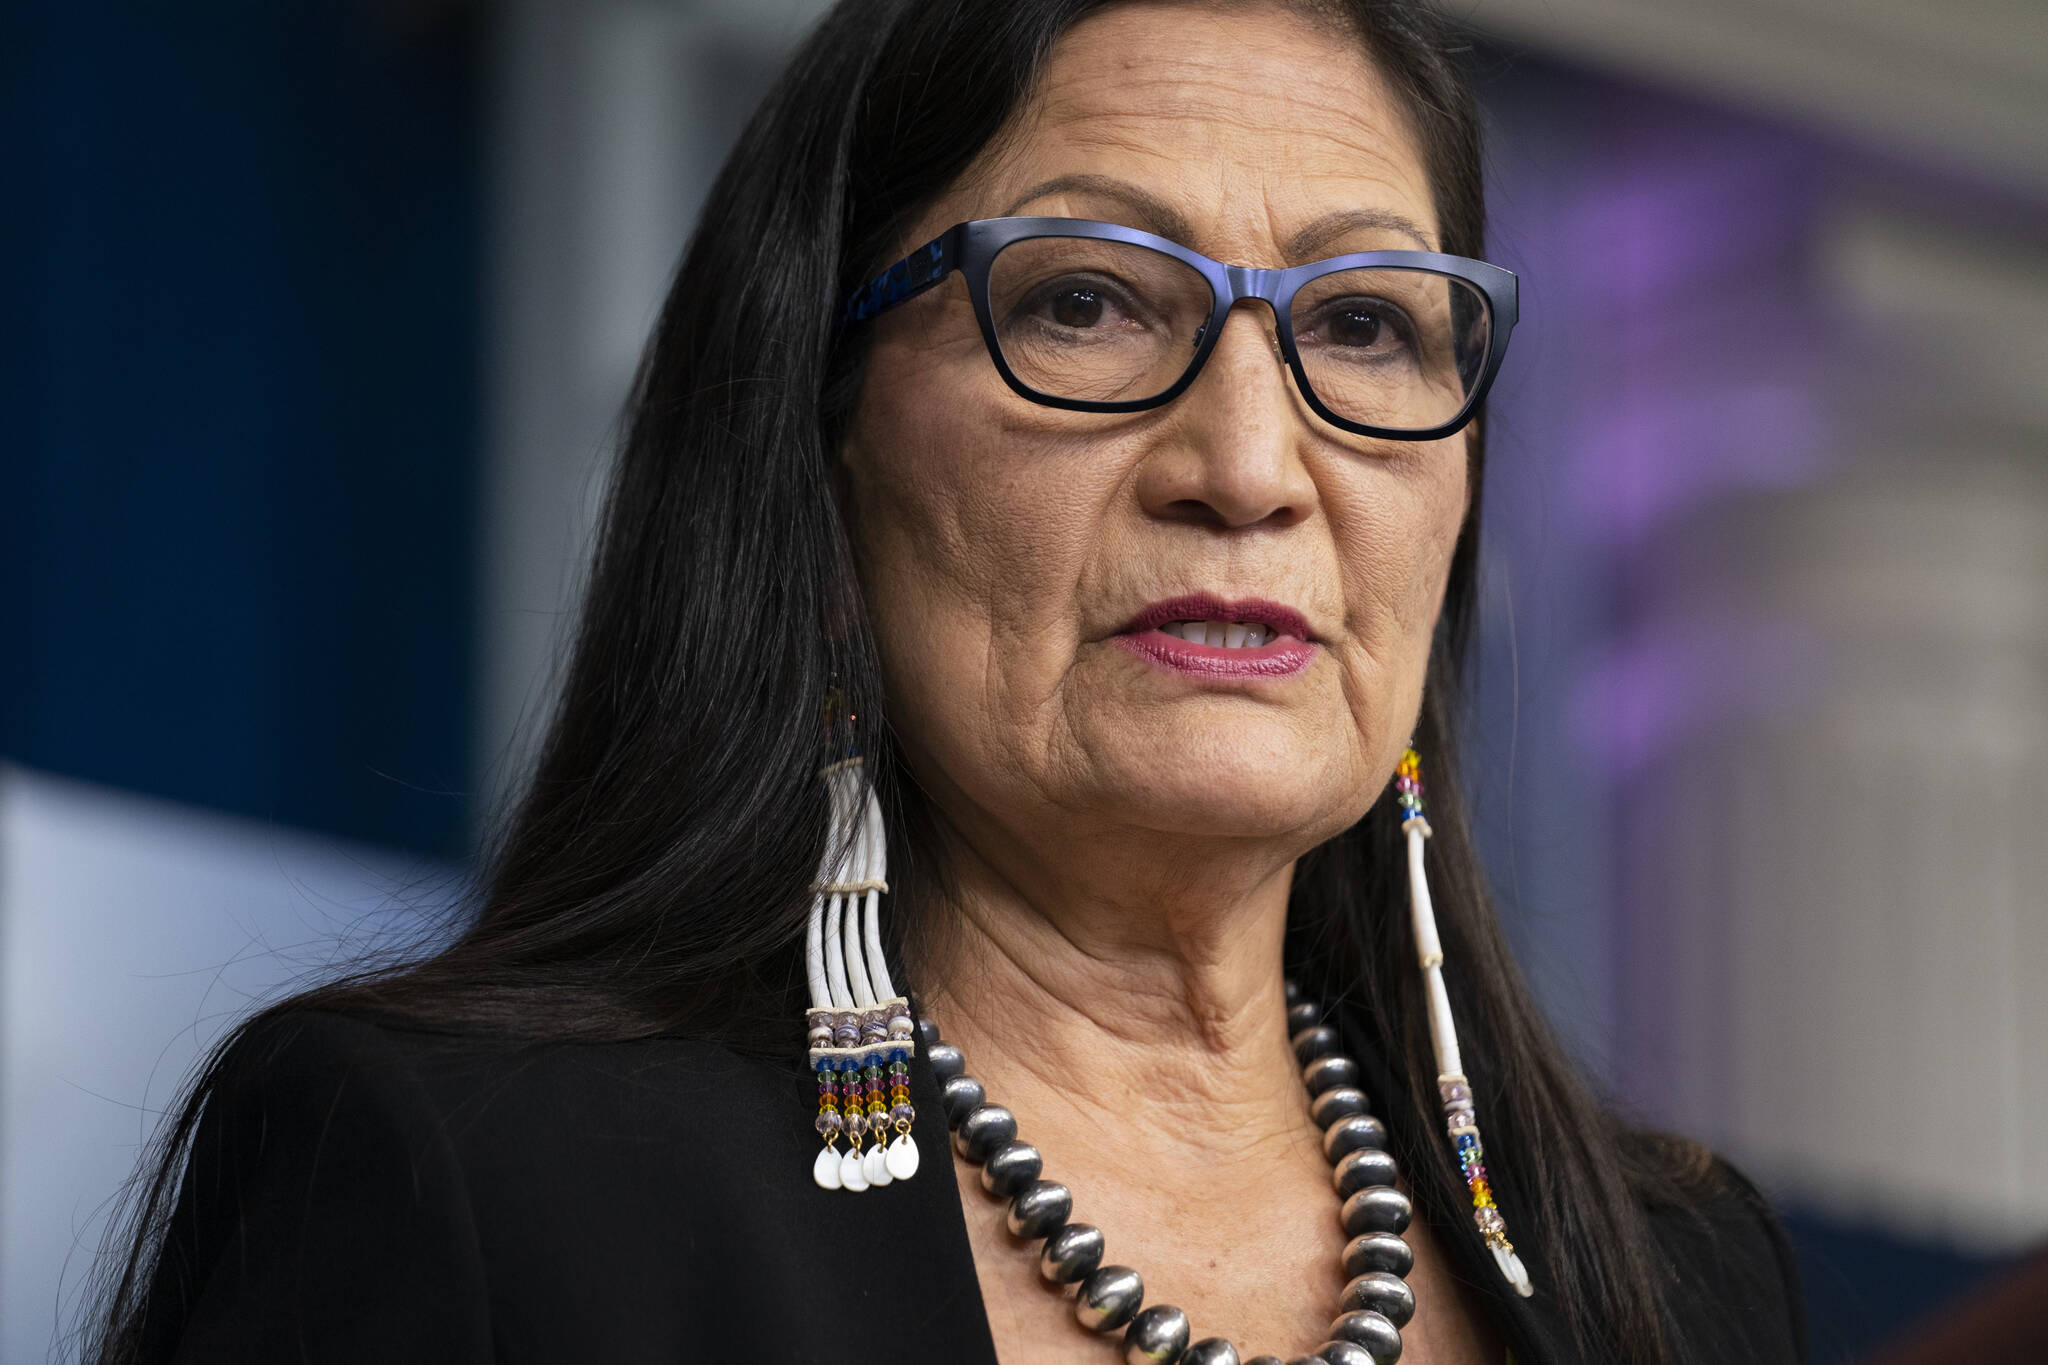 FILE - In this April 23, 2021 photo, Interior Secretary Deb Haaland speaks during a news briefing at the White House in Washington. Secretary Haaland vowed on her first day on the job to ensure Native American tribes have opportunities to speak with her and the agencies she oversees. Native American and Alaska Native groups are seeing change under Haaland but some remain frustrated with the pace of action. (AP Photo/Evan Vucci, File)